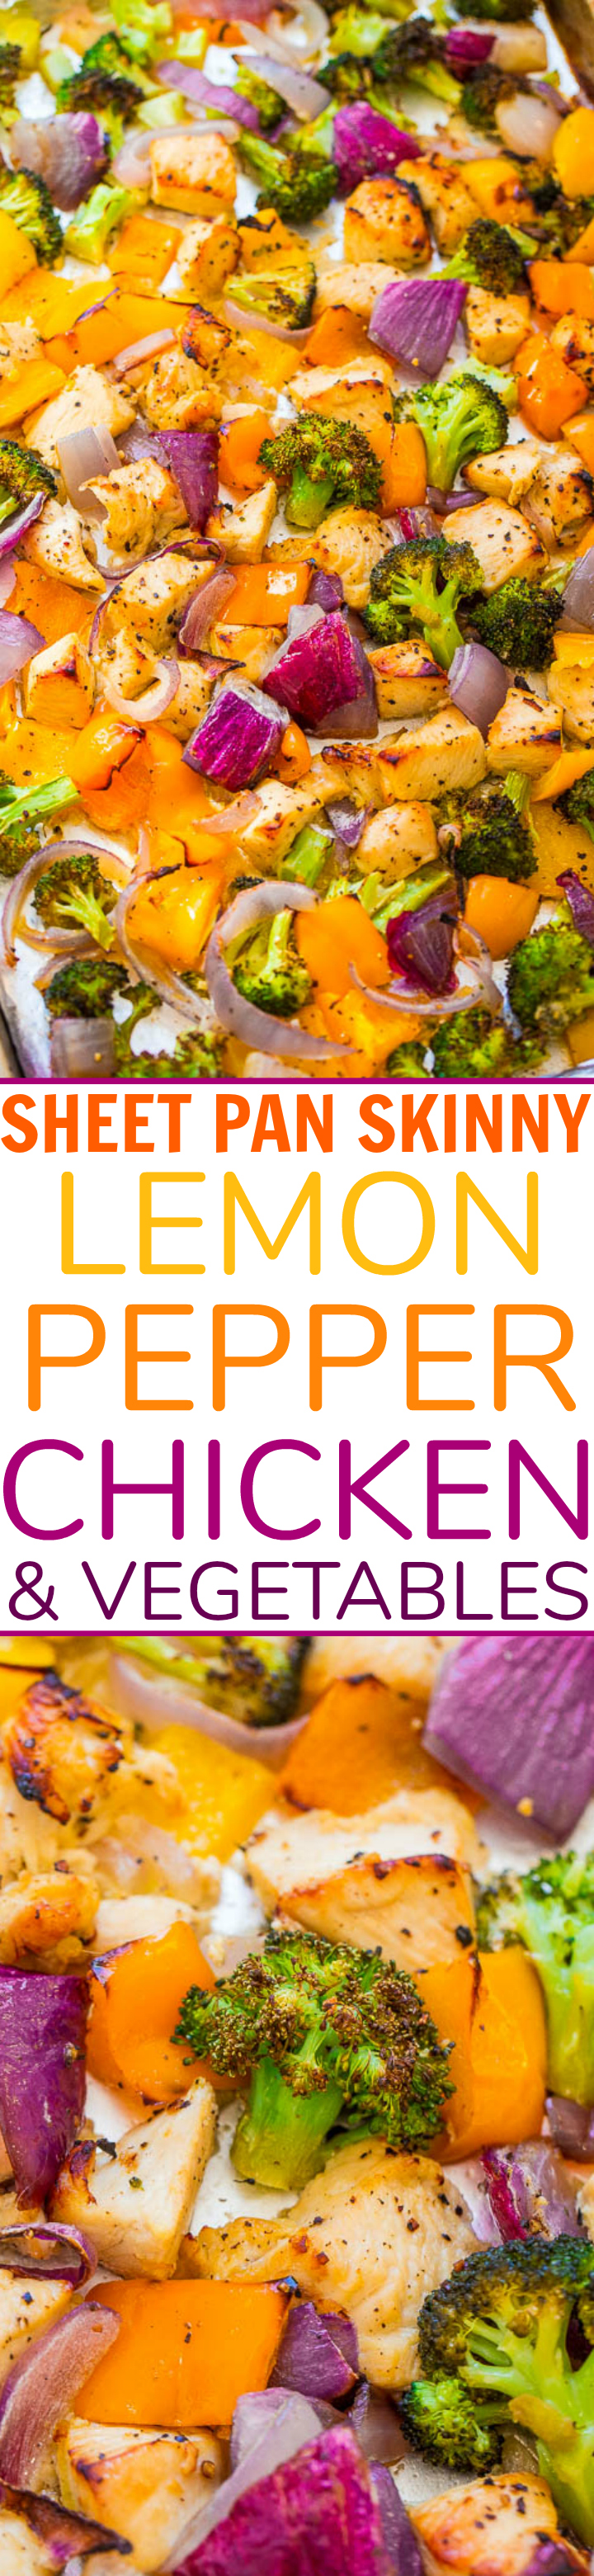 Baked Lemon Pepper Chicken and Vegetables — An EASY sheet pan chicken dinner that's ready in 25 minutes!! Bonus that it's SKINNY and has so much FLAVOR from the lemon pepper!!